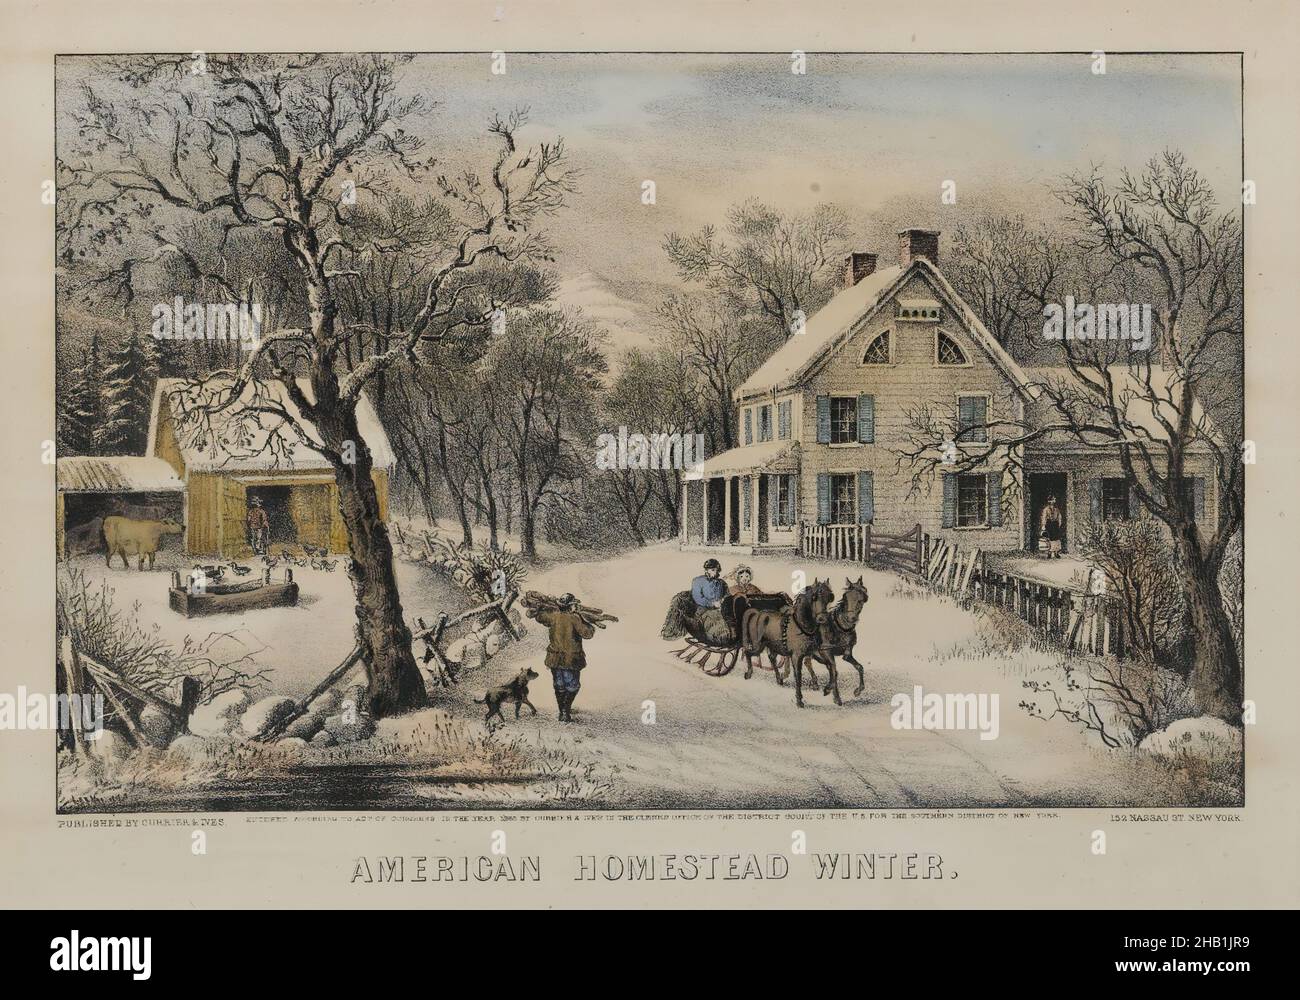 American Homestead Winter, Currier & Ives, American, Hand-colored lithograph on wove paper, 1868-1869, Sheet: 9 3/4 x 13 13/16 in., 24.8 x 35.1 cm, American, Americana, chores, country scene, dog and master, firewood, good old days, horse drawn sled, Nostalgia, Nostalgic, old fashioned, Rural, sleigh, snow scene, transportation, village, WInter, winter scene Stock Photo